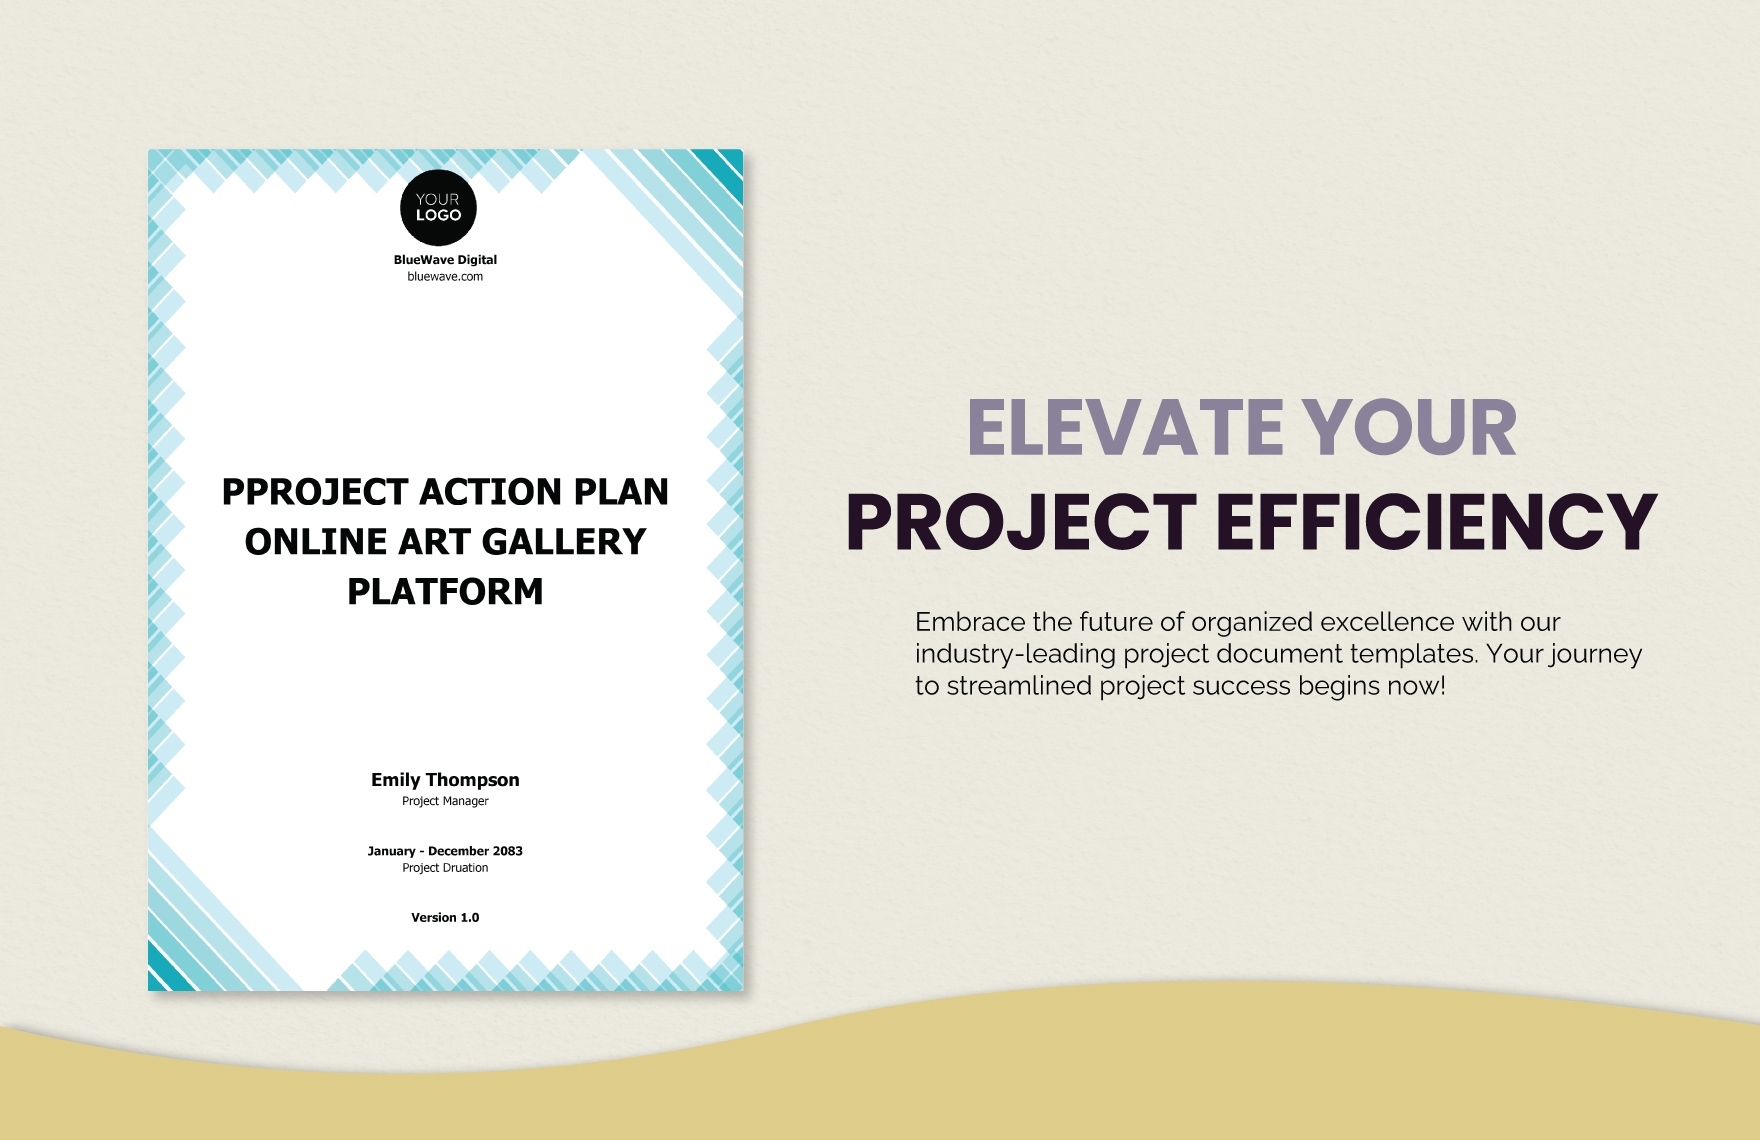 Project Action Plan Template